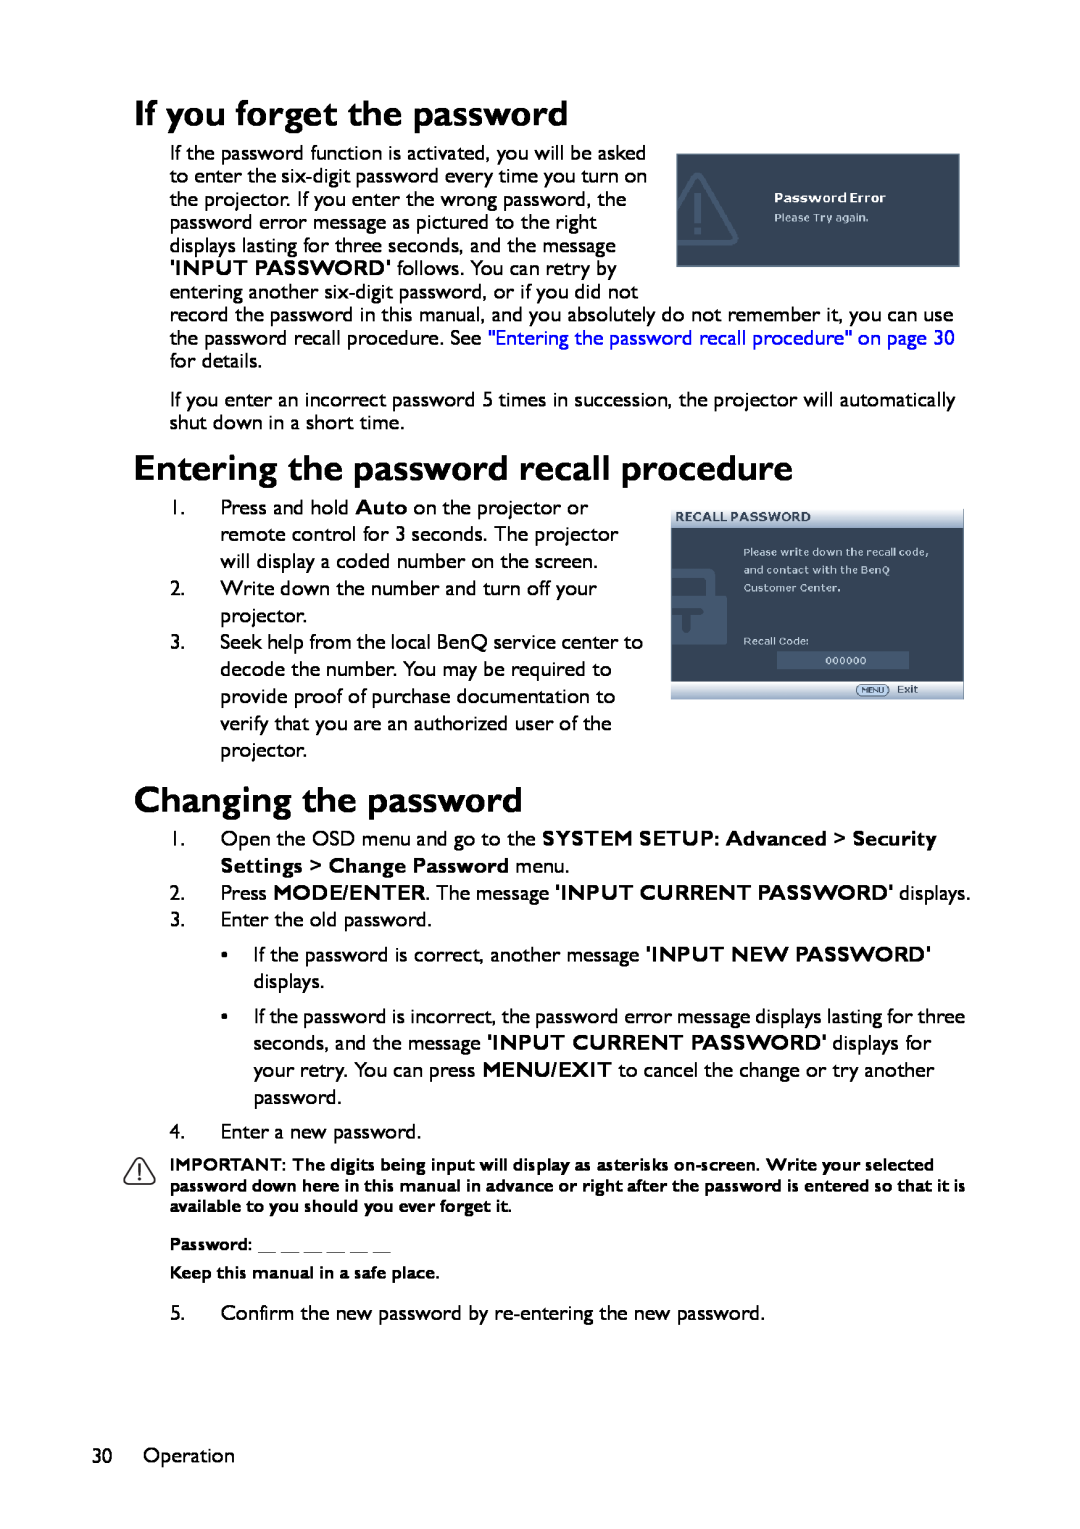 BenQ MS521 user manual If you forget the password, Entering the password recall procedure, Changing the password 